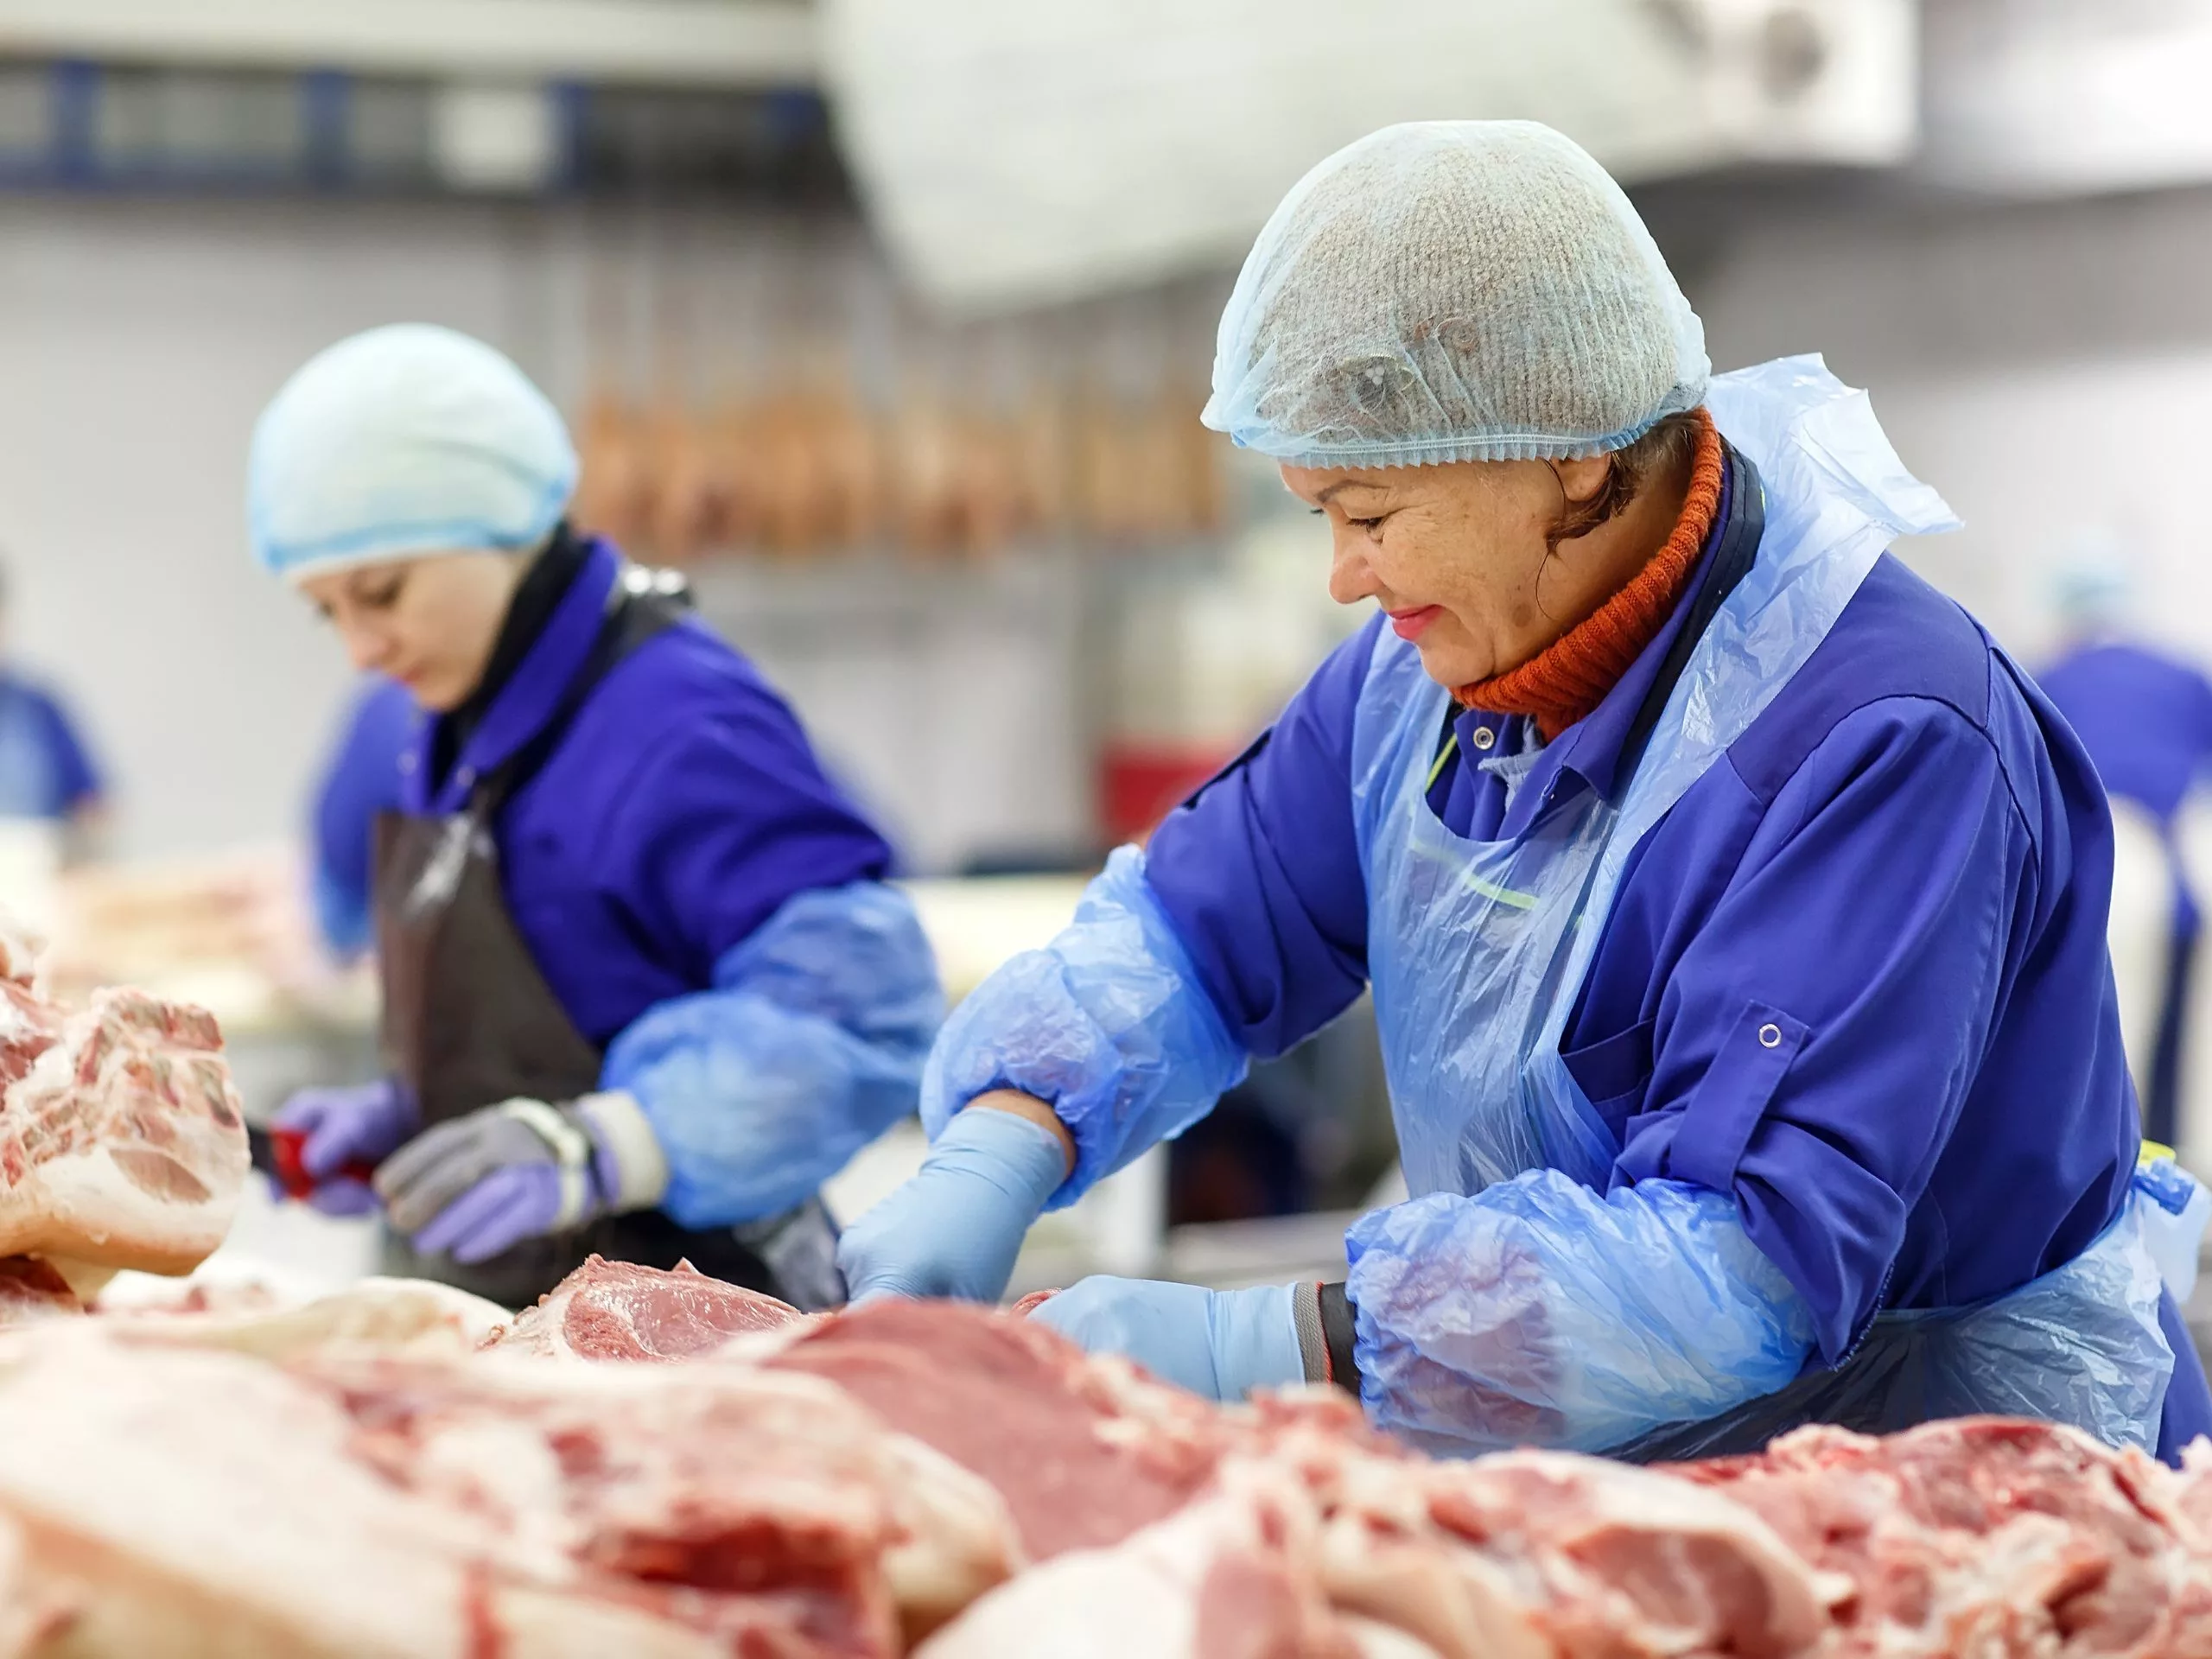 Employees manage inventory at commercial meat processing plant. Source: Canva.